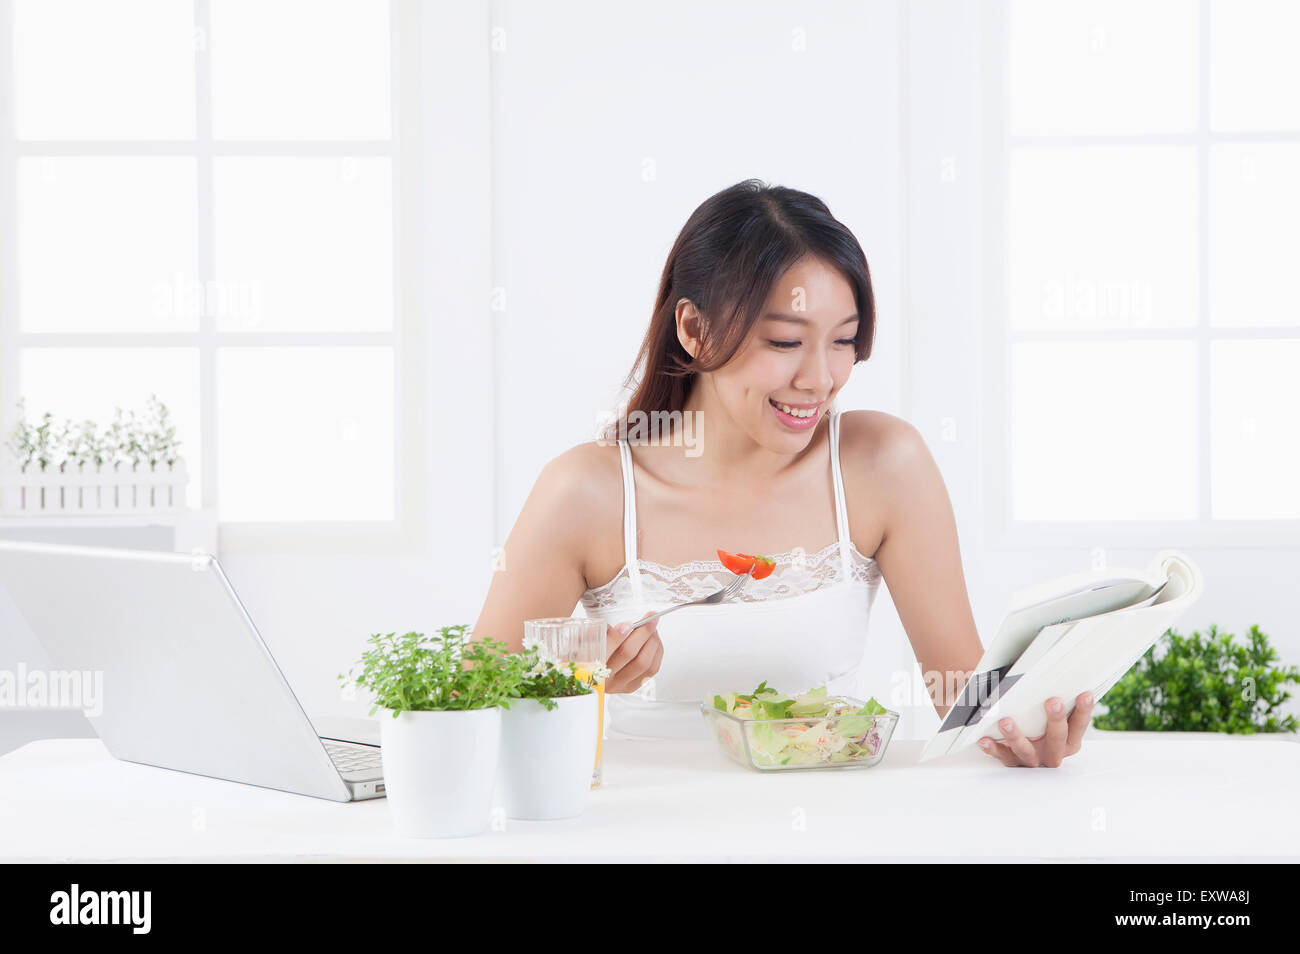 Young woman eating saland and reading a book, Stock Photo